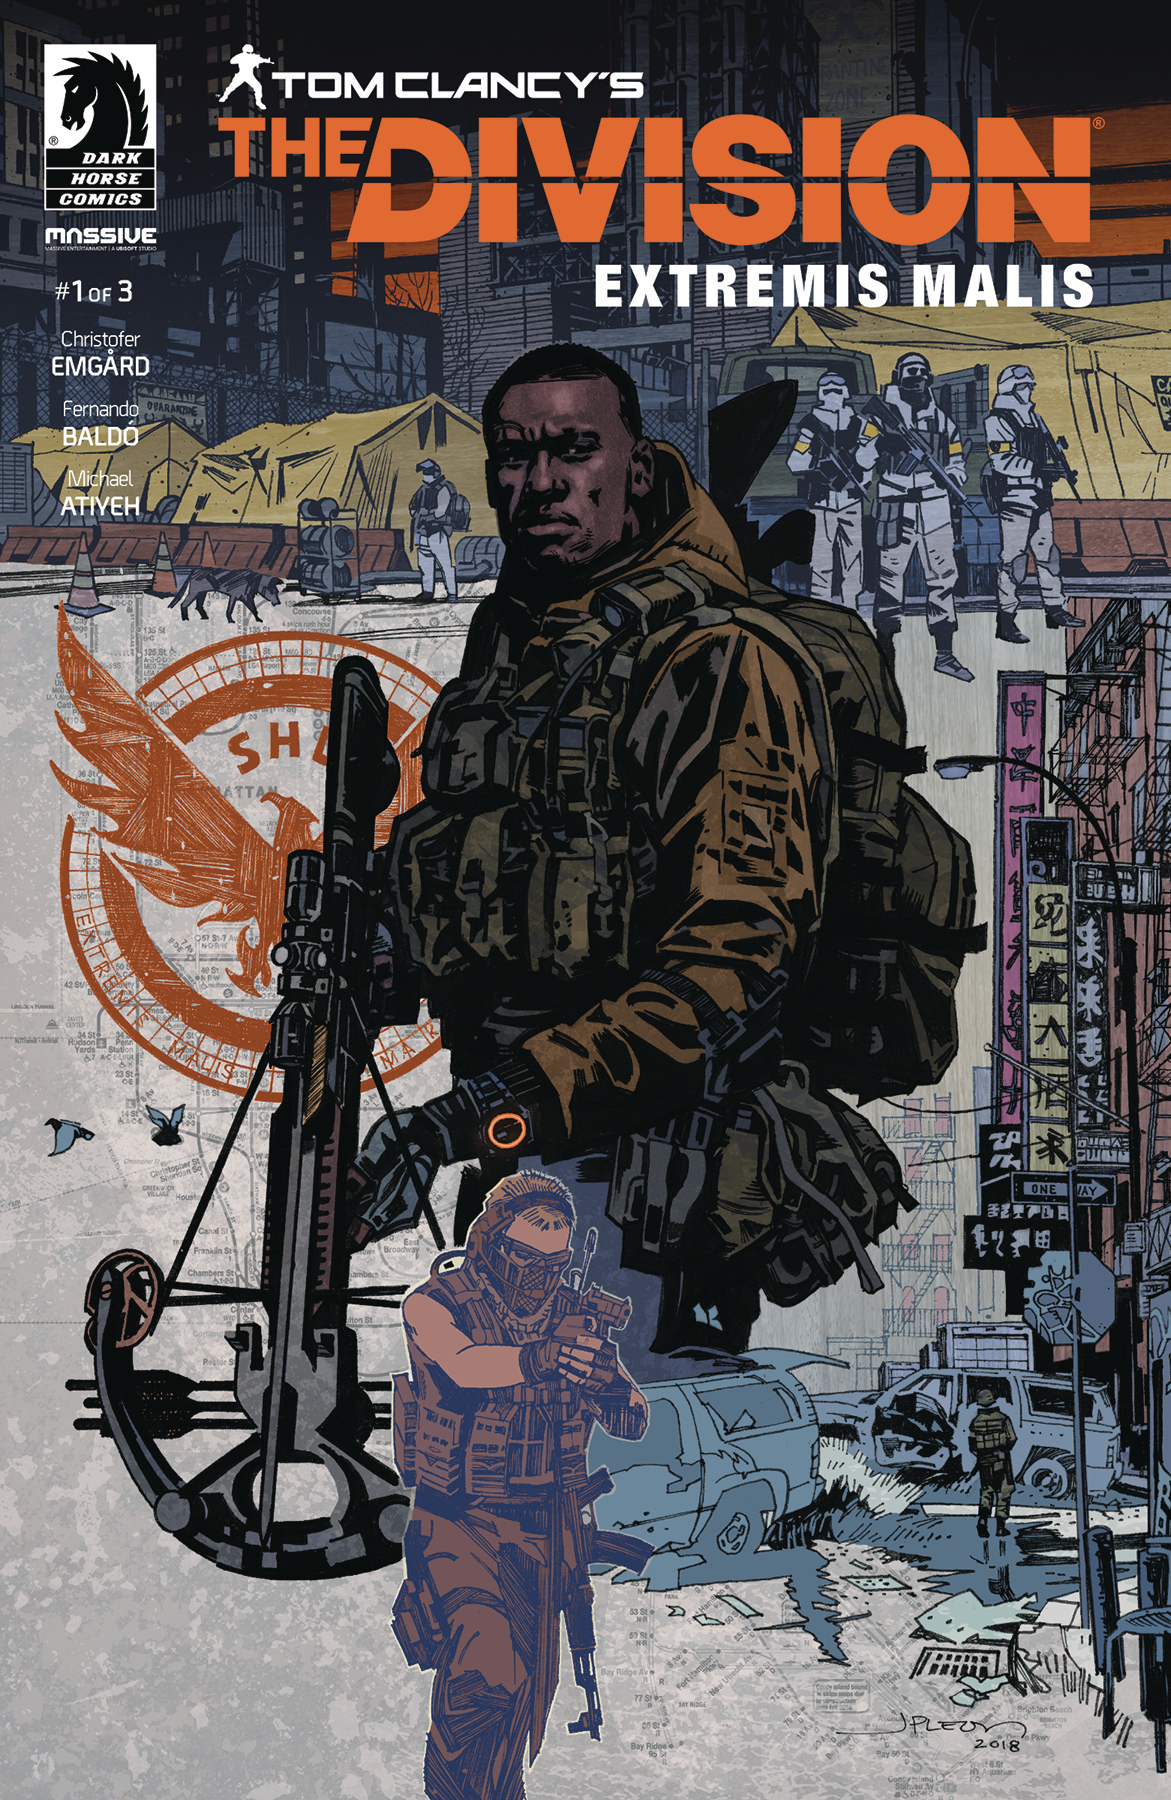 The Division: Extreme Malis no. 1 (2018 Series)